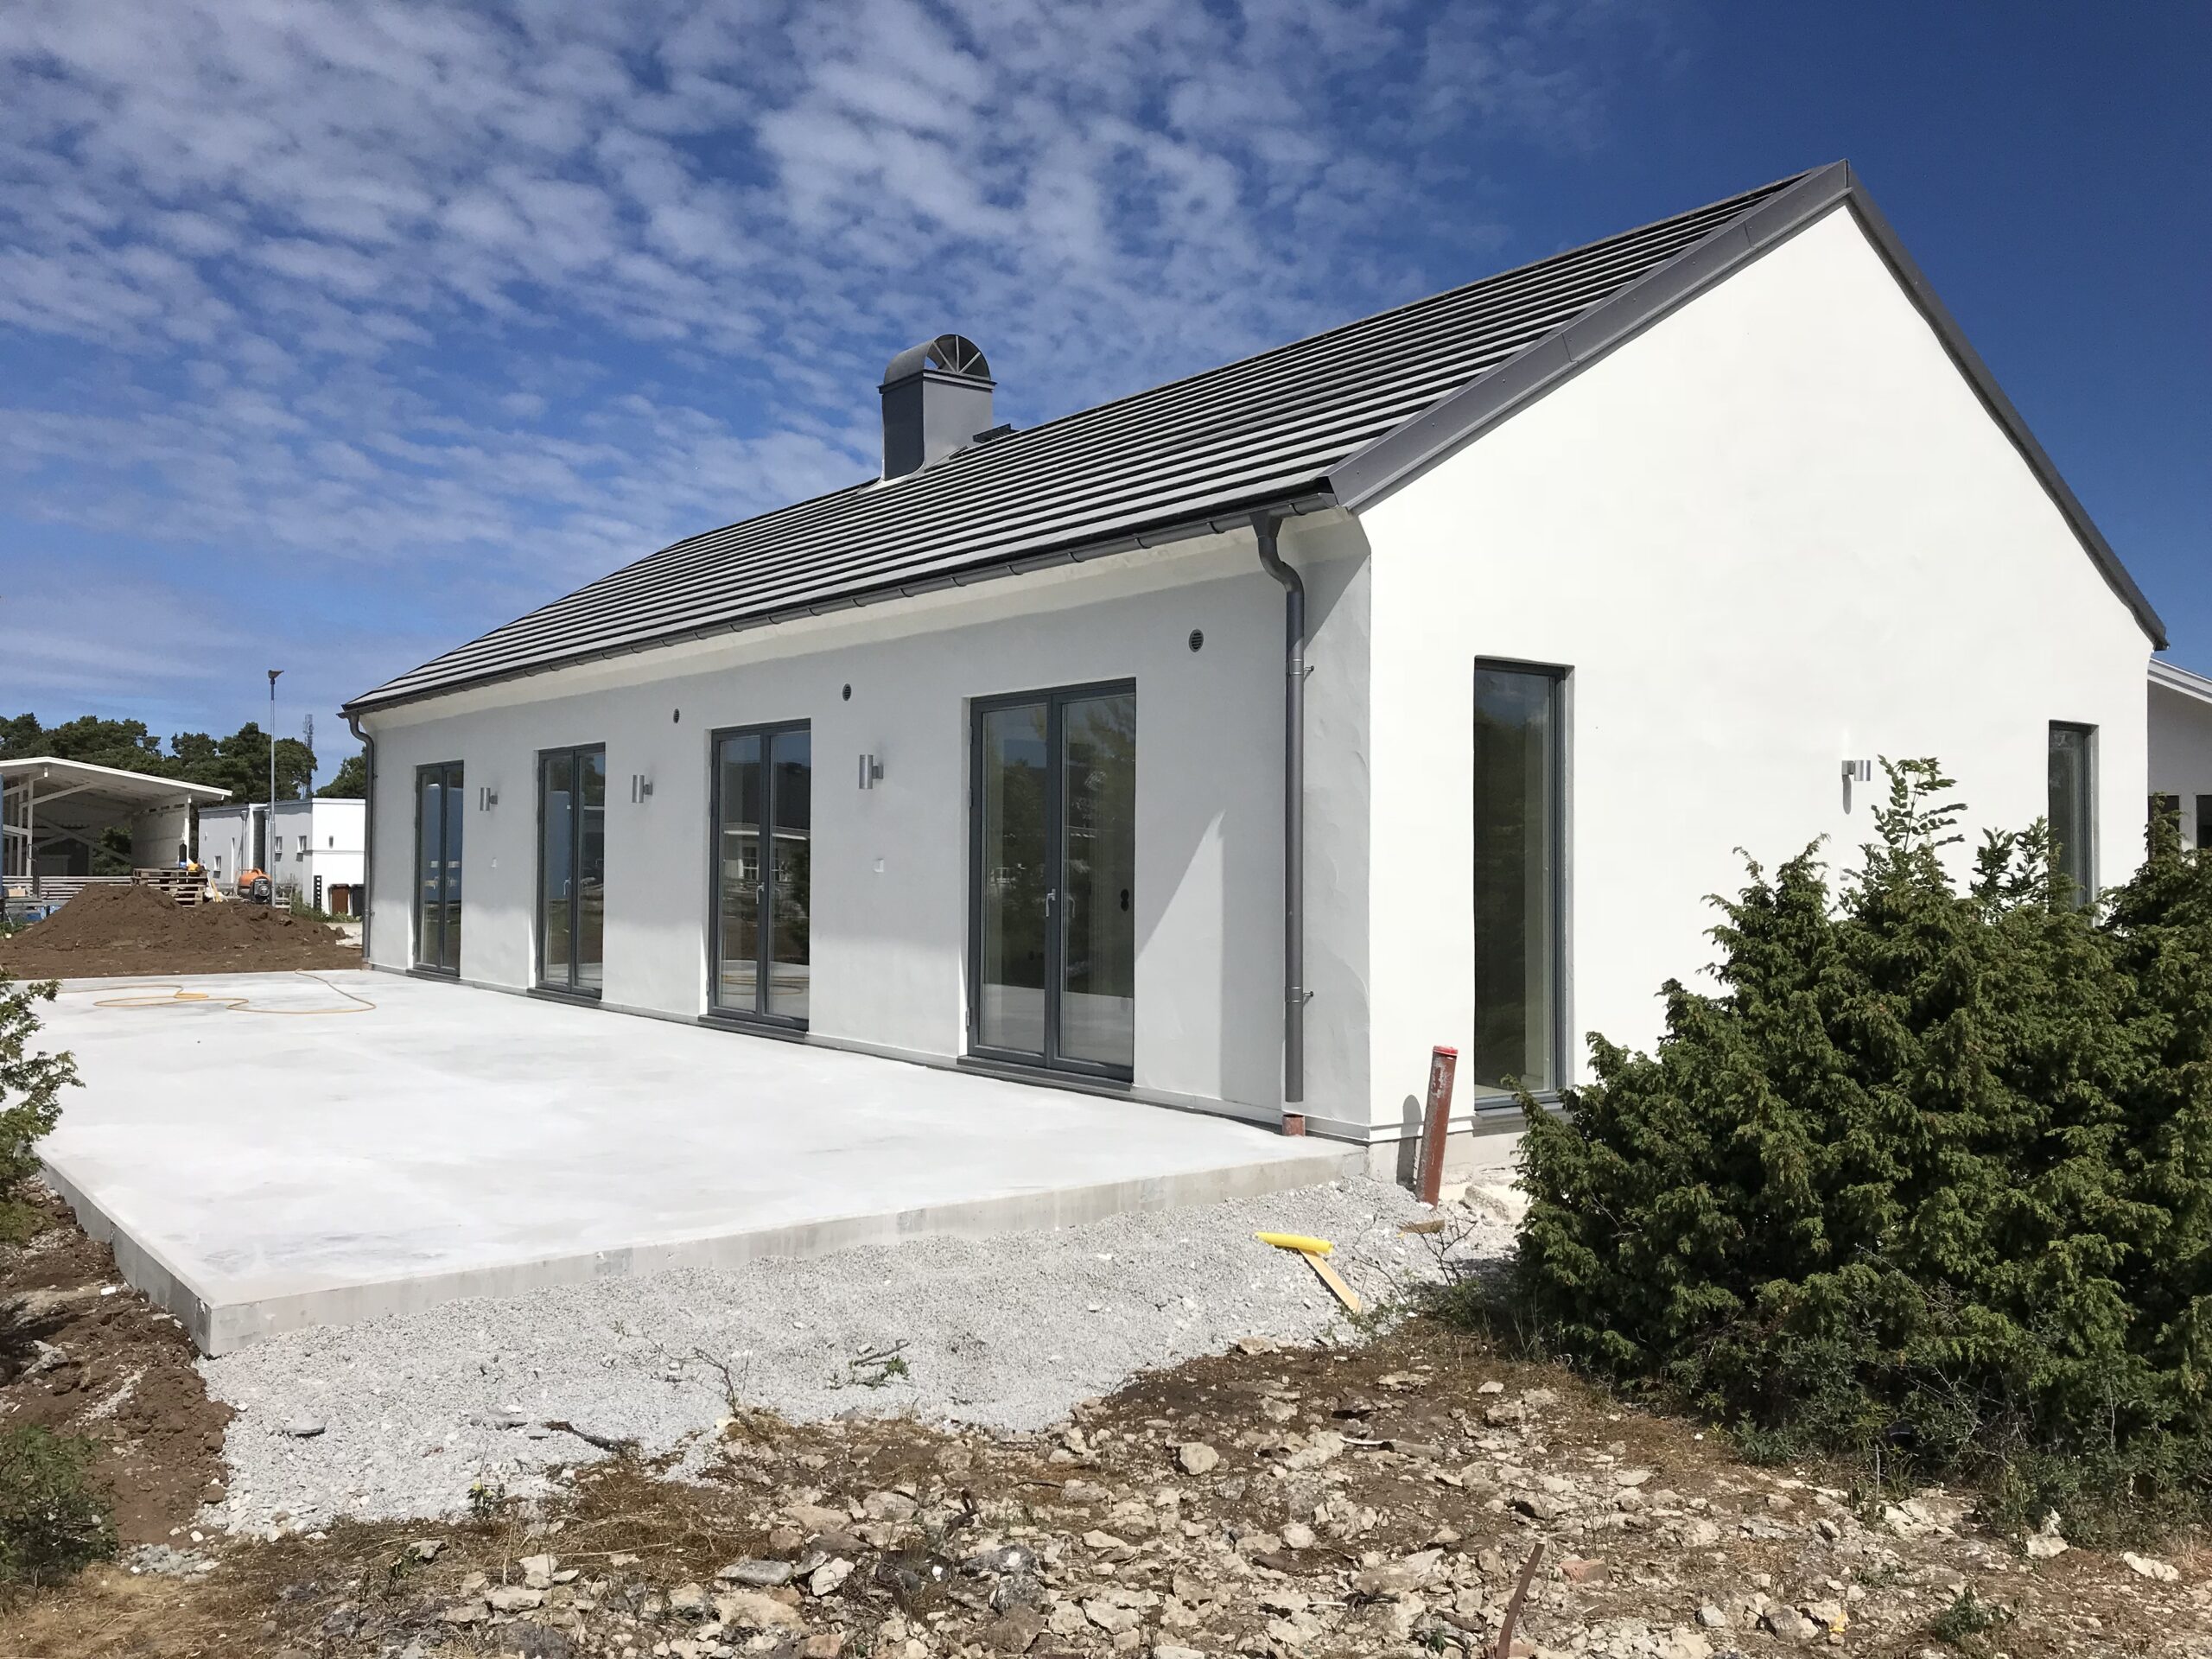 Nordicflexhouse is delivering green villa houses to Gotland, produced in Denmark